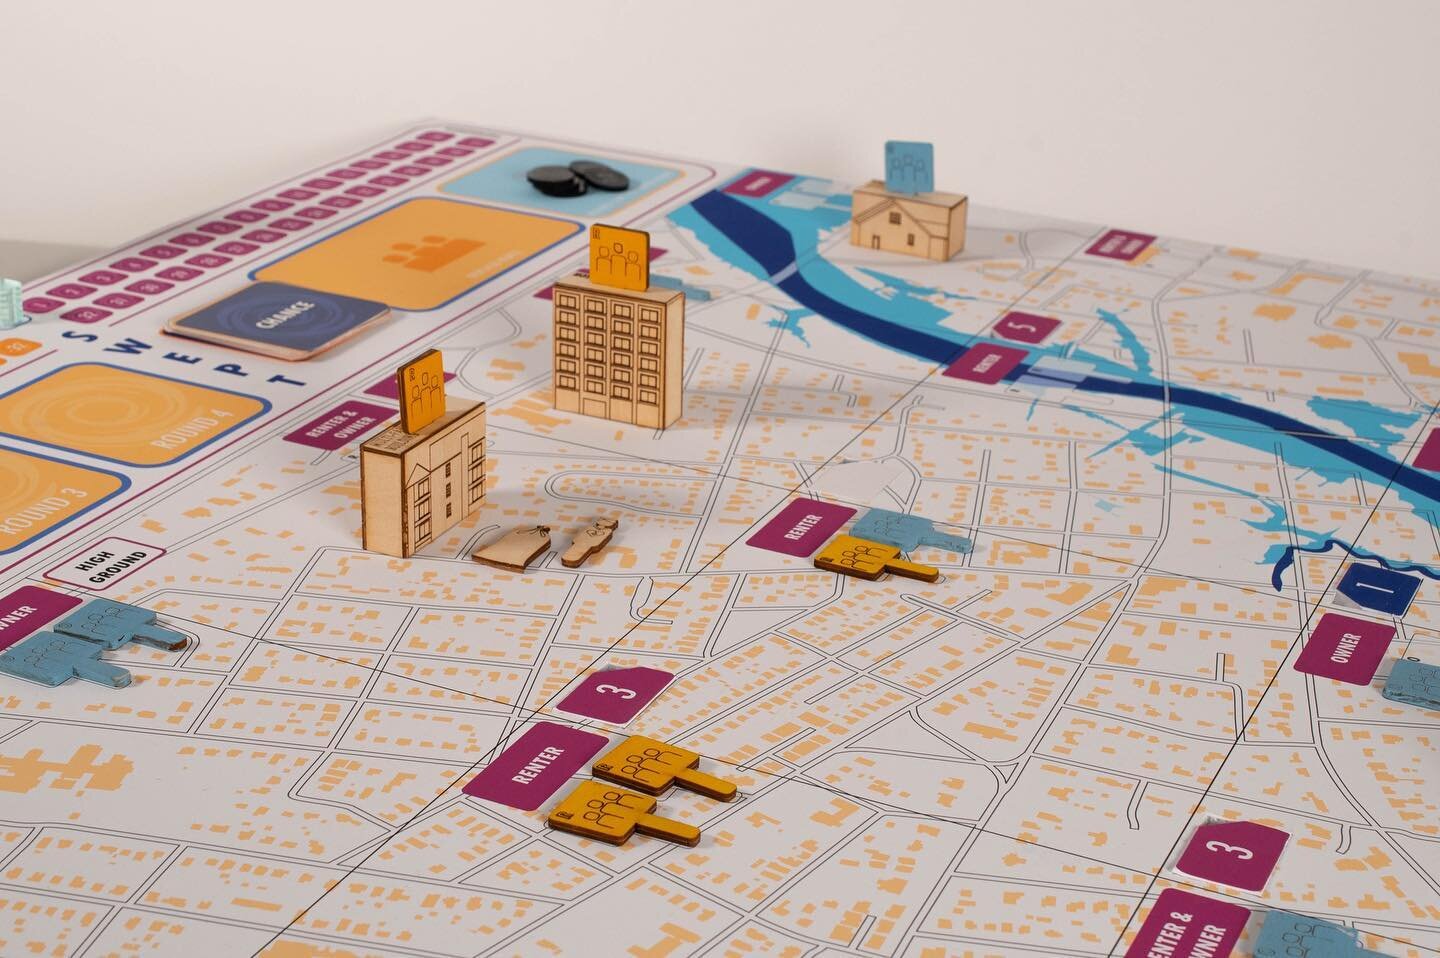 &quot;SWEPT! Taking Recovery Housing by Storm&quot;

Games are shown to be more effective in teaching disaster response, transforming the problem into an approachable, thought-provoking, and fun scenario without trivializing the disaster experience. 